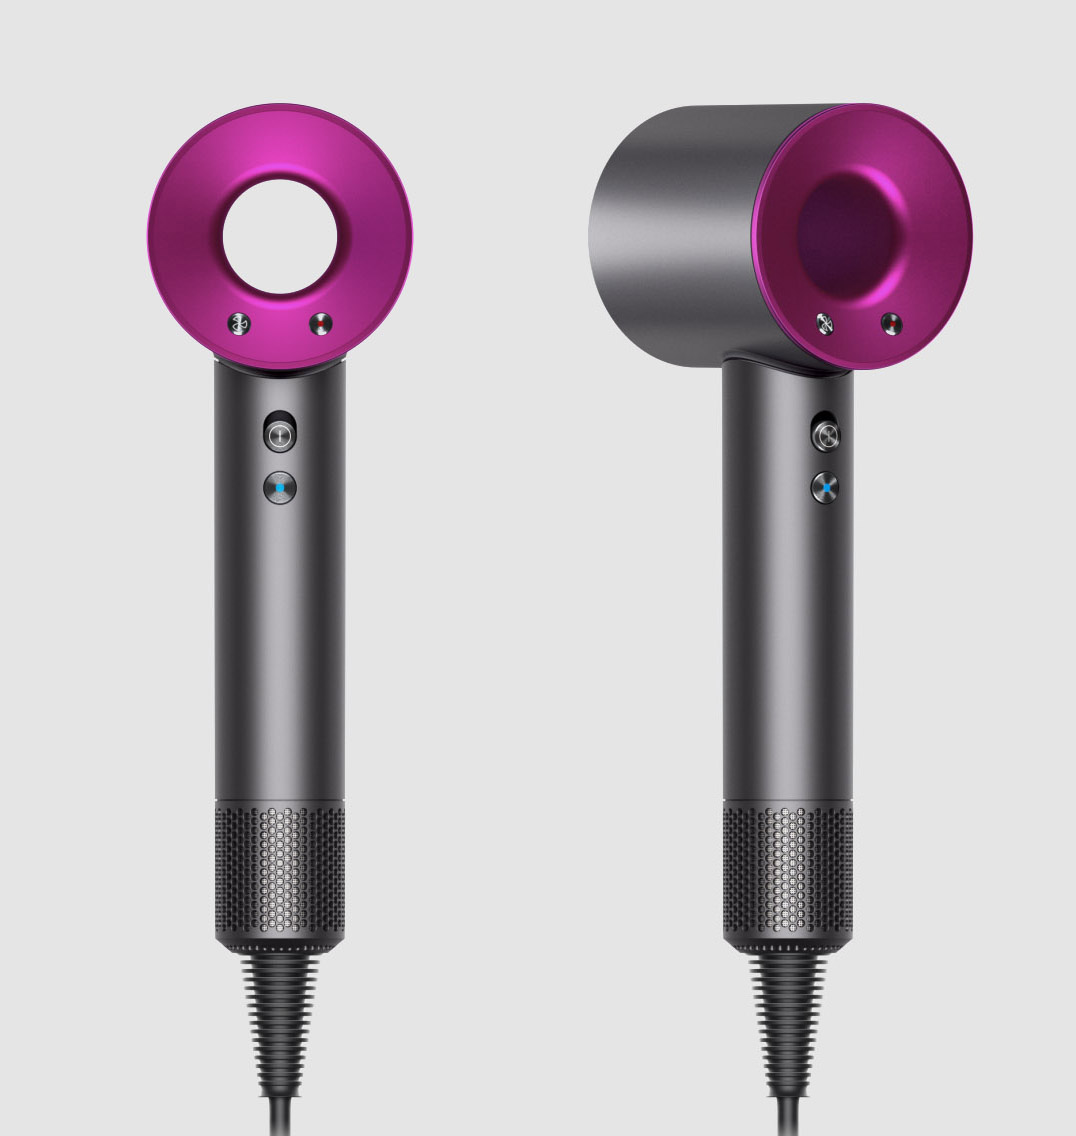 The Dyson Supersonic Revolutionizes Hair Drying